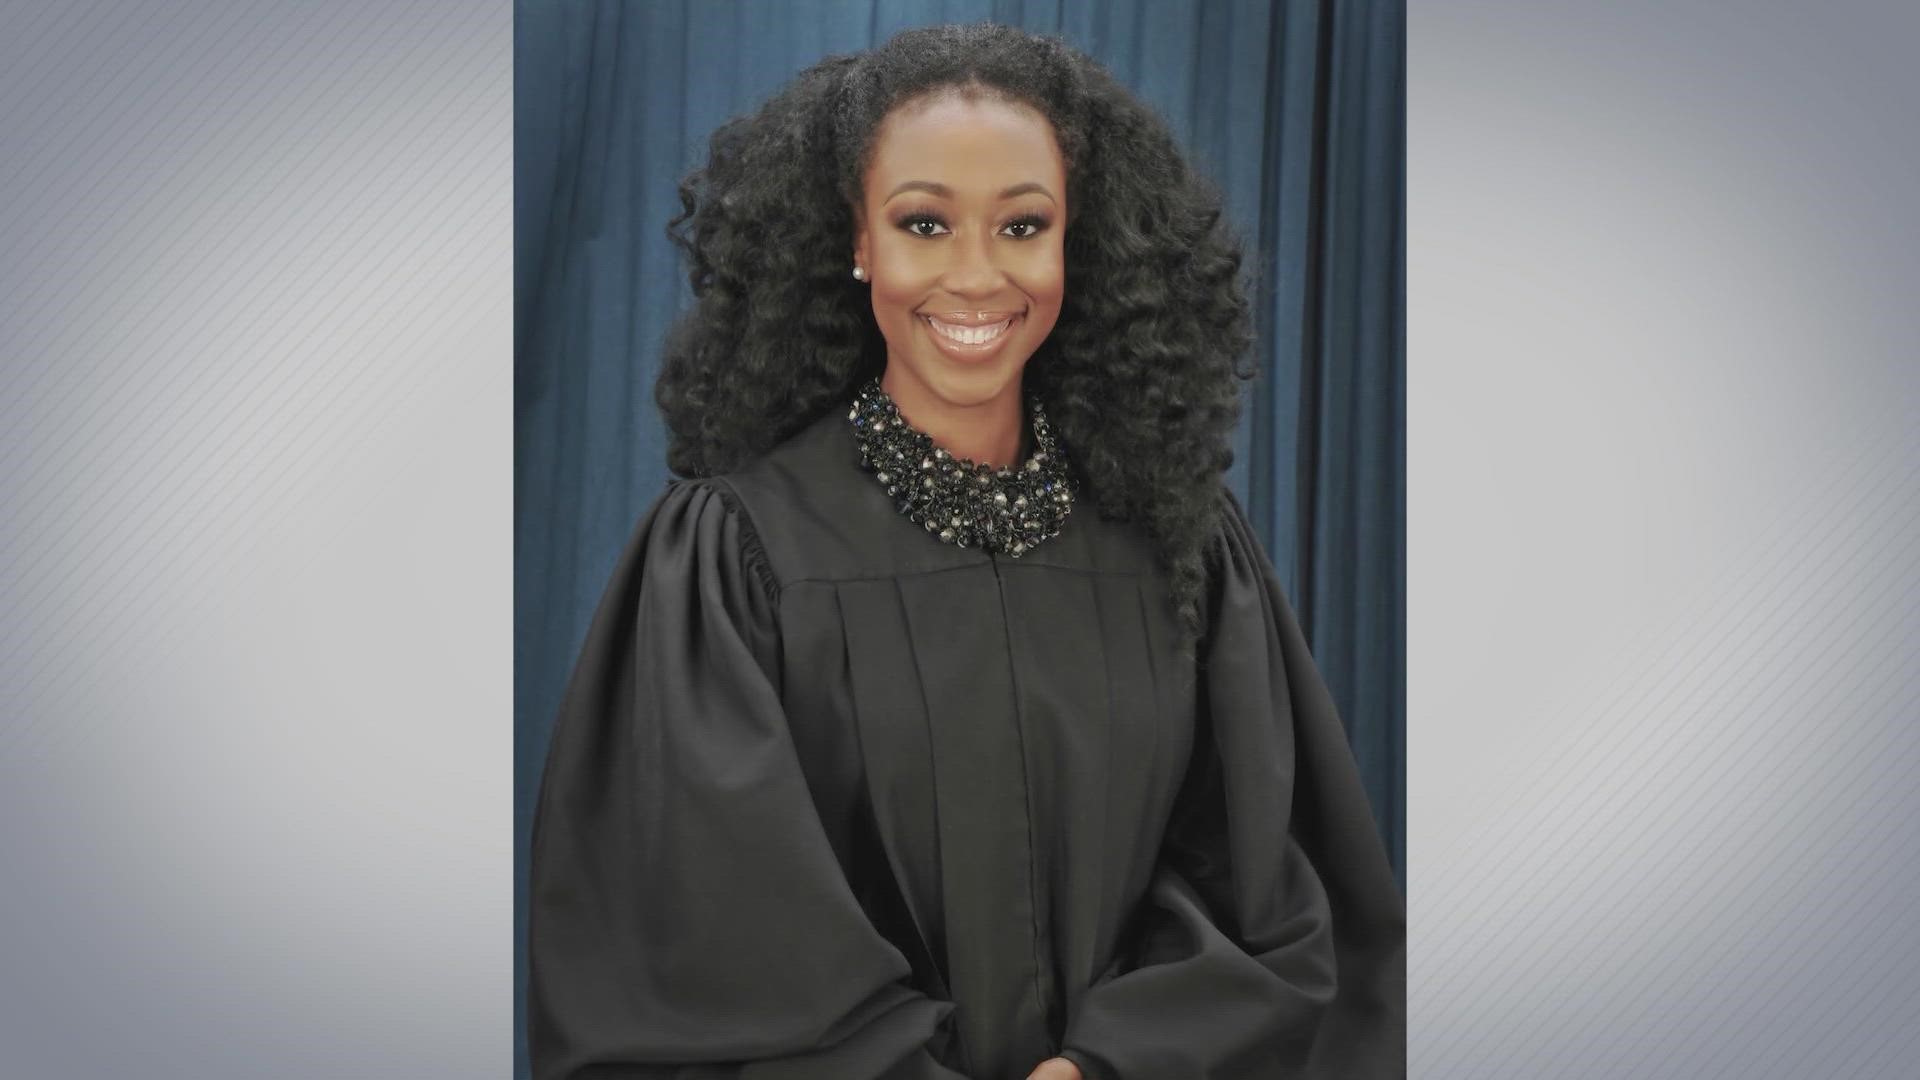 Dallas County District Judge Amber Givens Recused from Dozens of Upcoming Cases After Several Attorneys Allege Bias